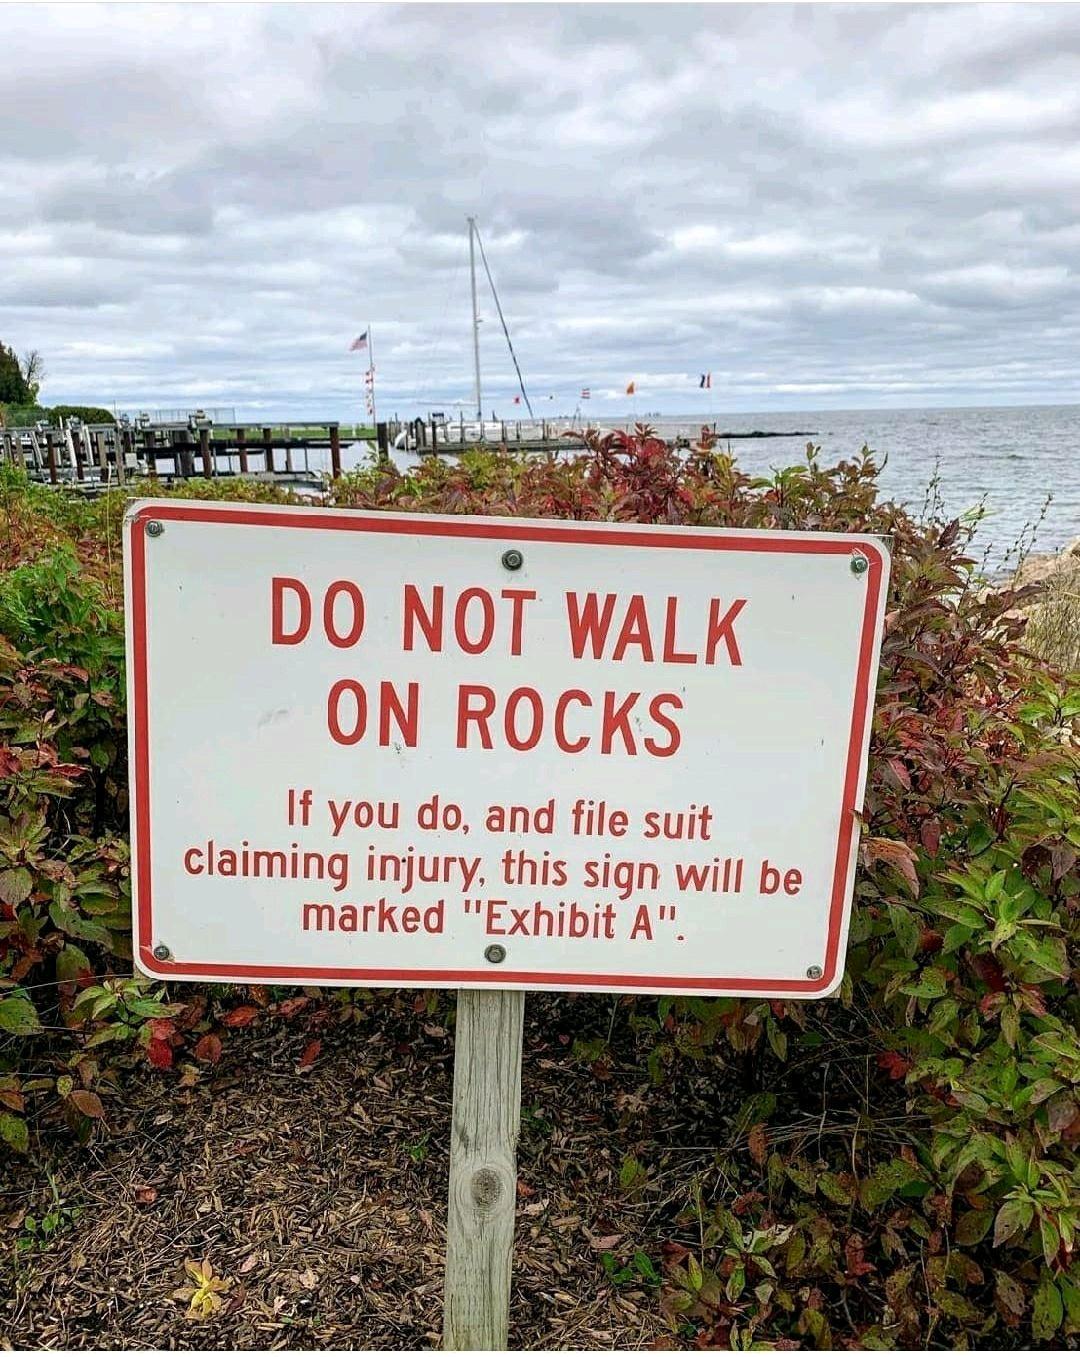 assumption of risk - Do Not Walk On Rocks If you do, and file suit claiming injury, this sign will be marked "Exhibit A".